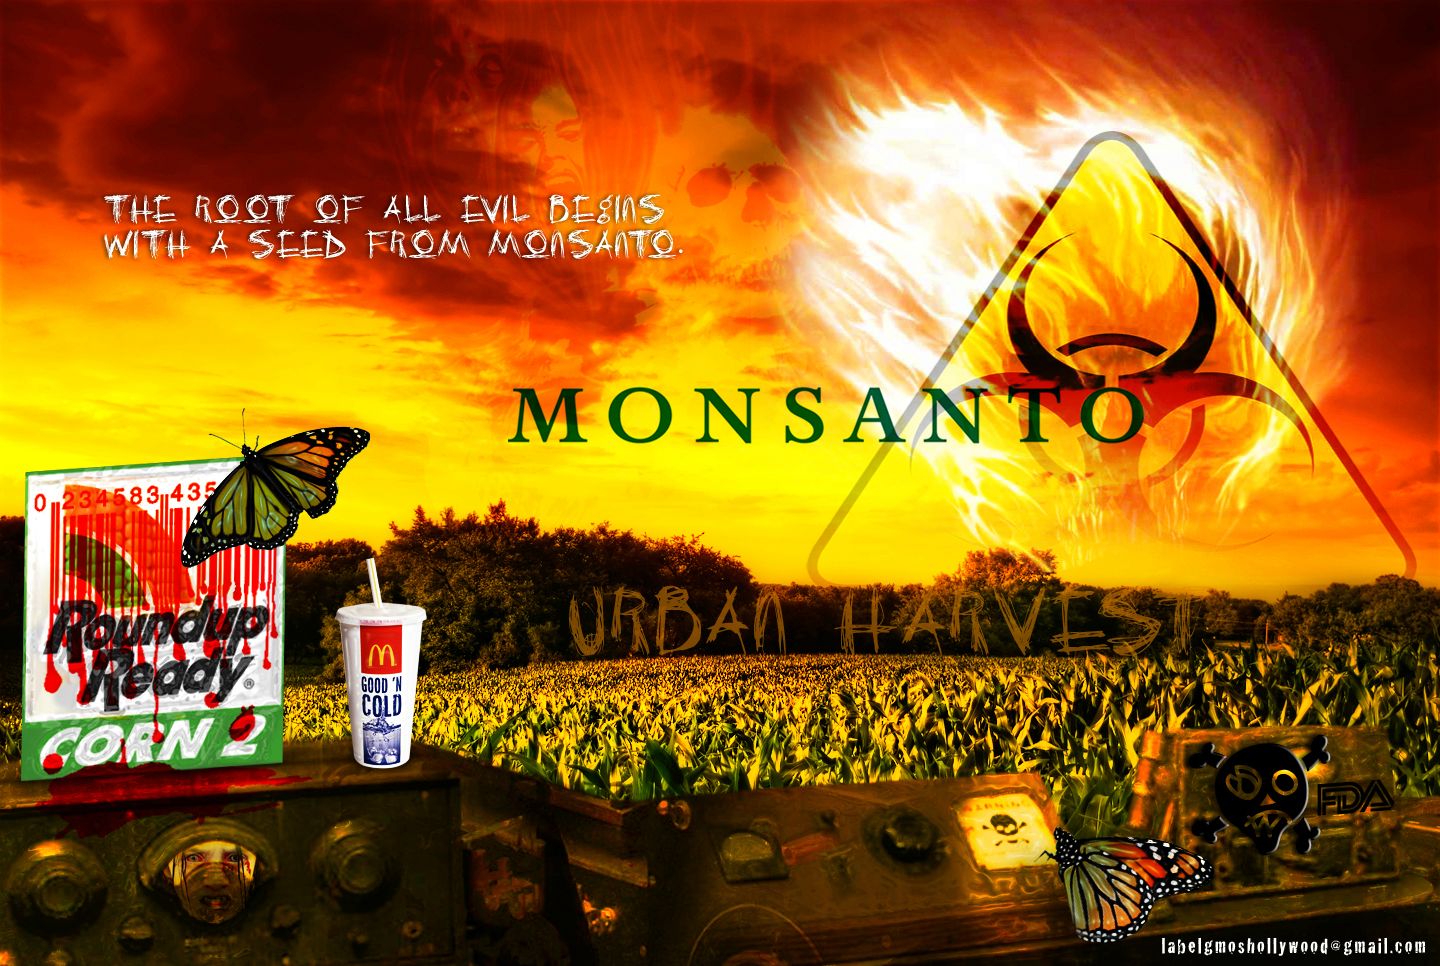 Monsanto Cutting 1,000 Jobs as Chemical Giant Takes First Annual Loss in 6 Years